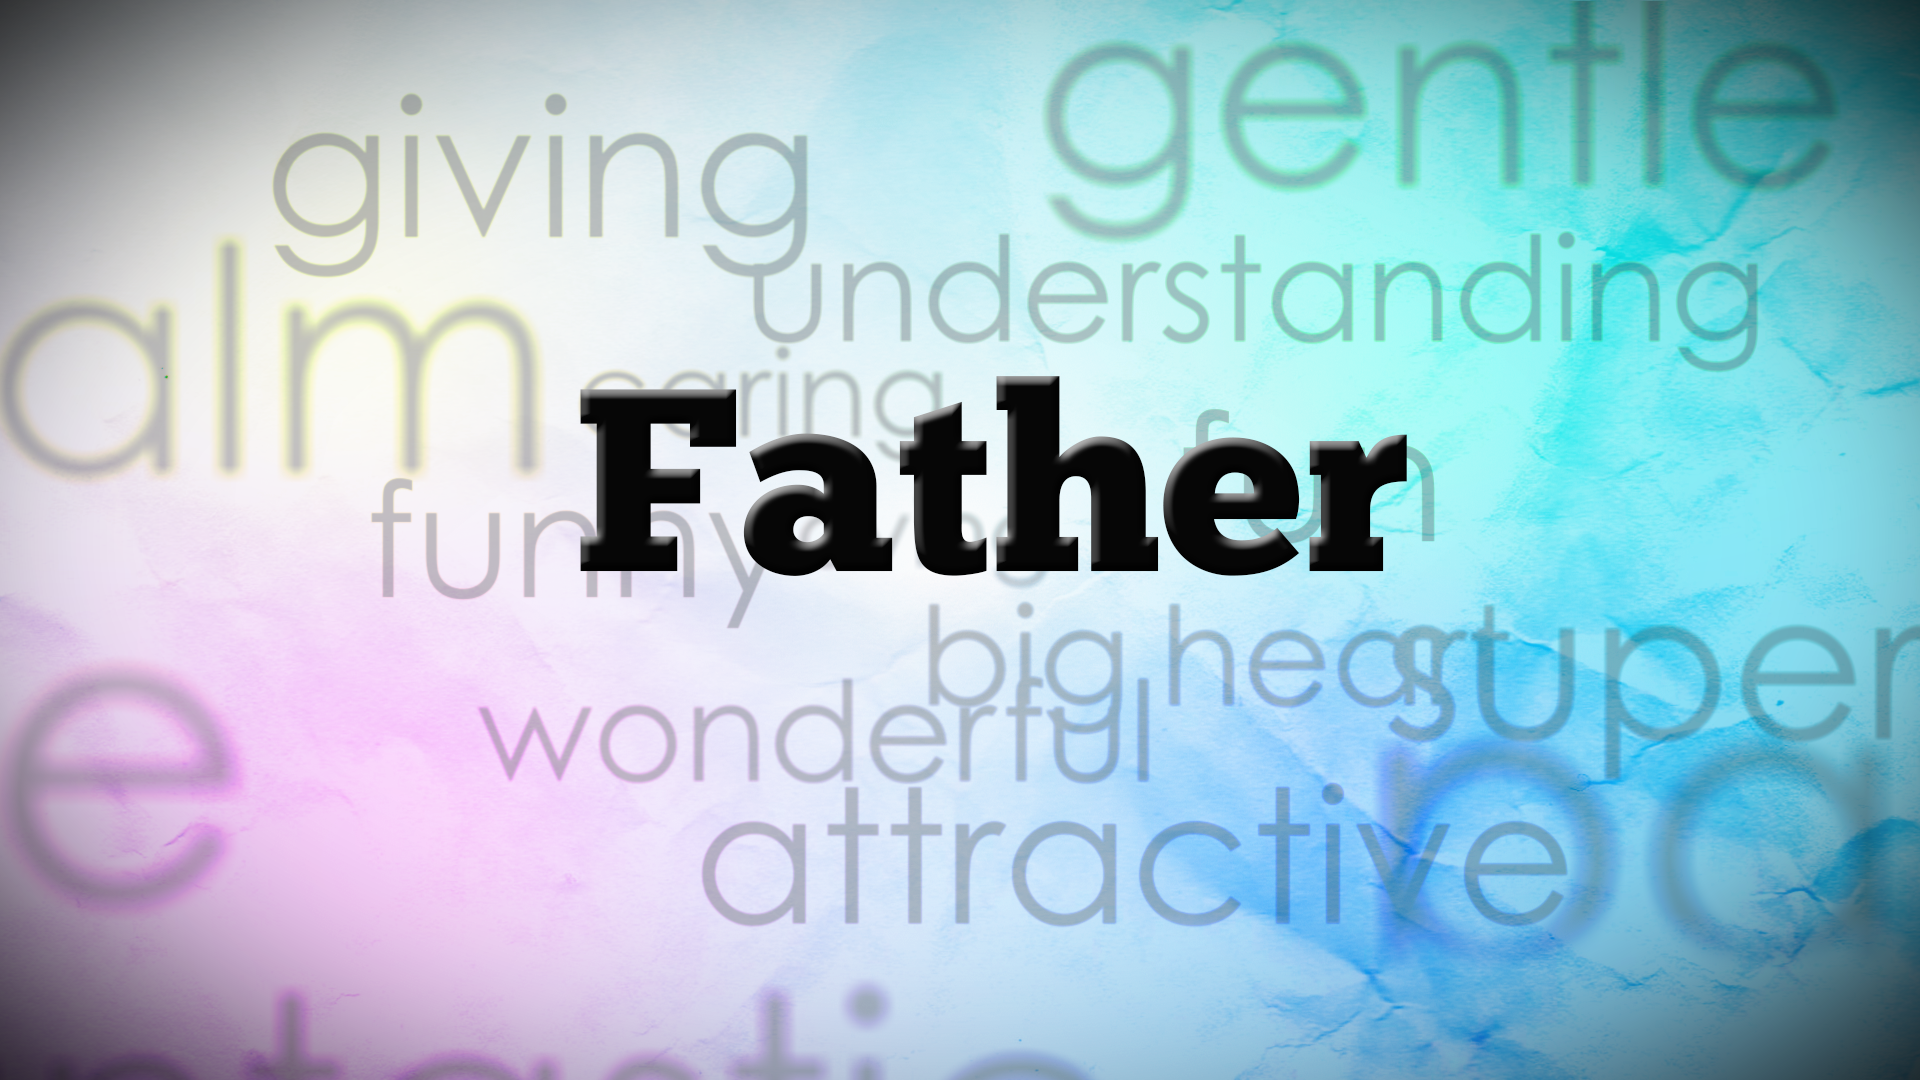 Free wallpapers for-happy_fathers_day-2015